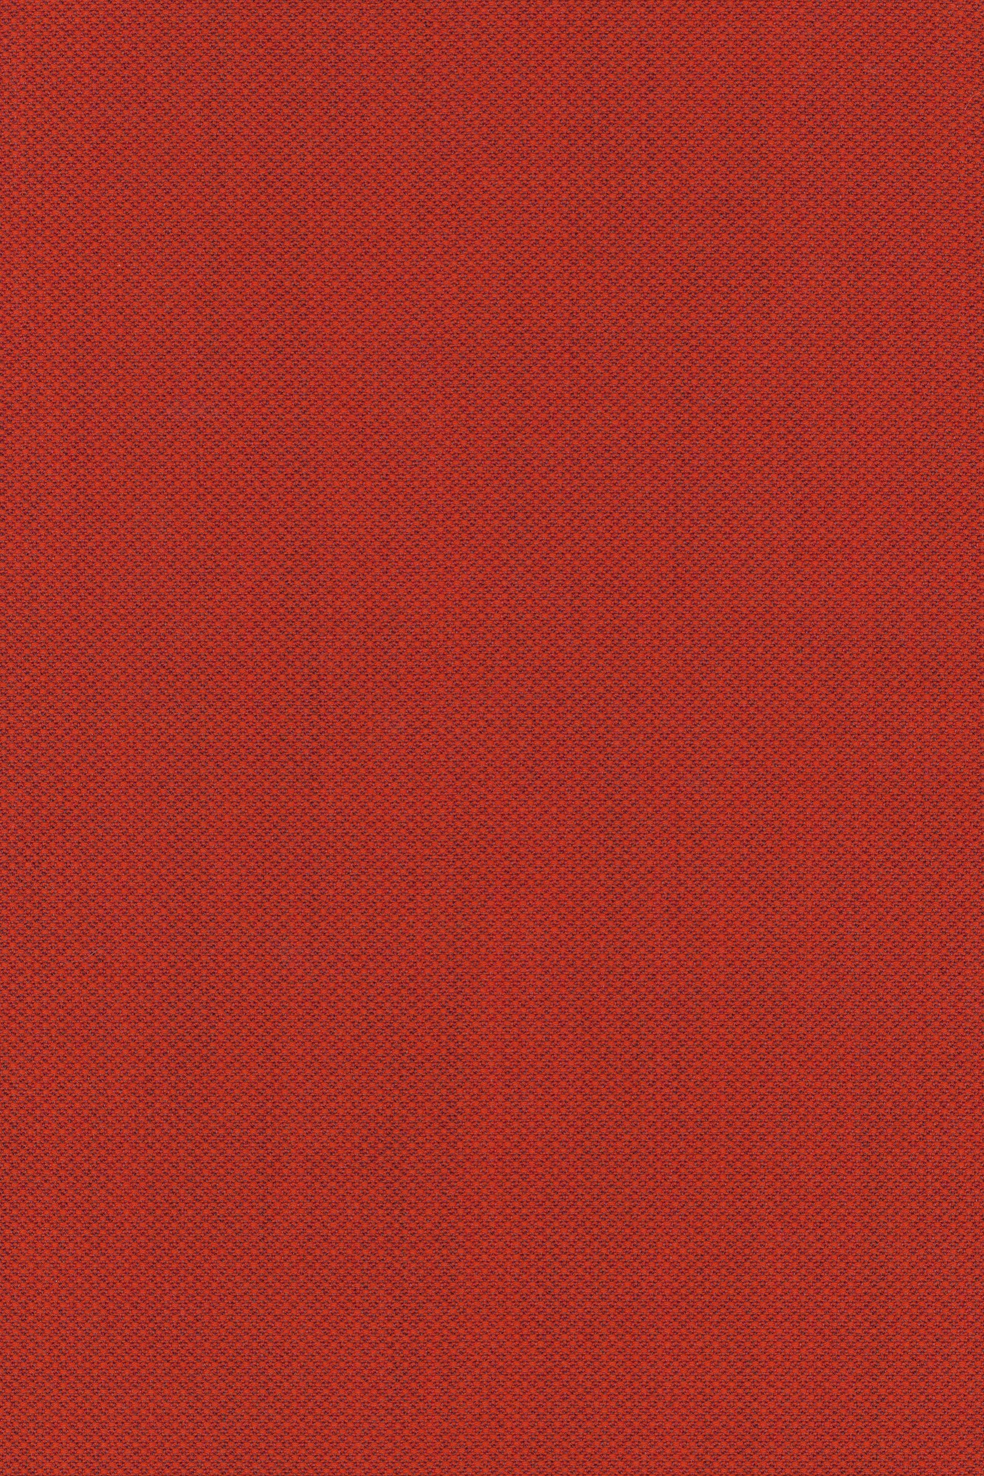 Fabric sample Fiord 571 red